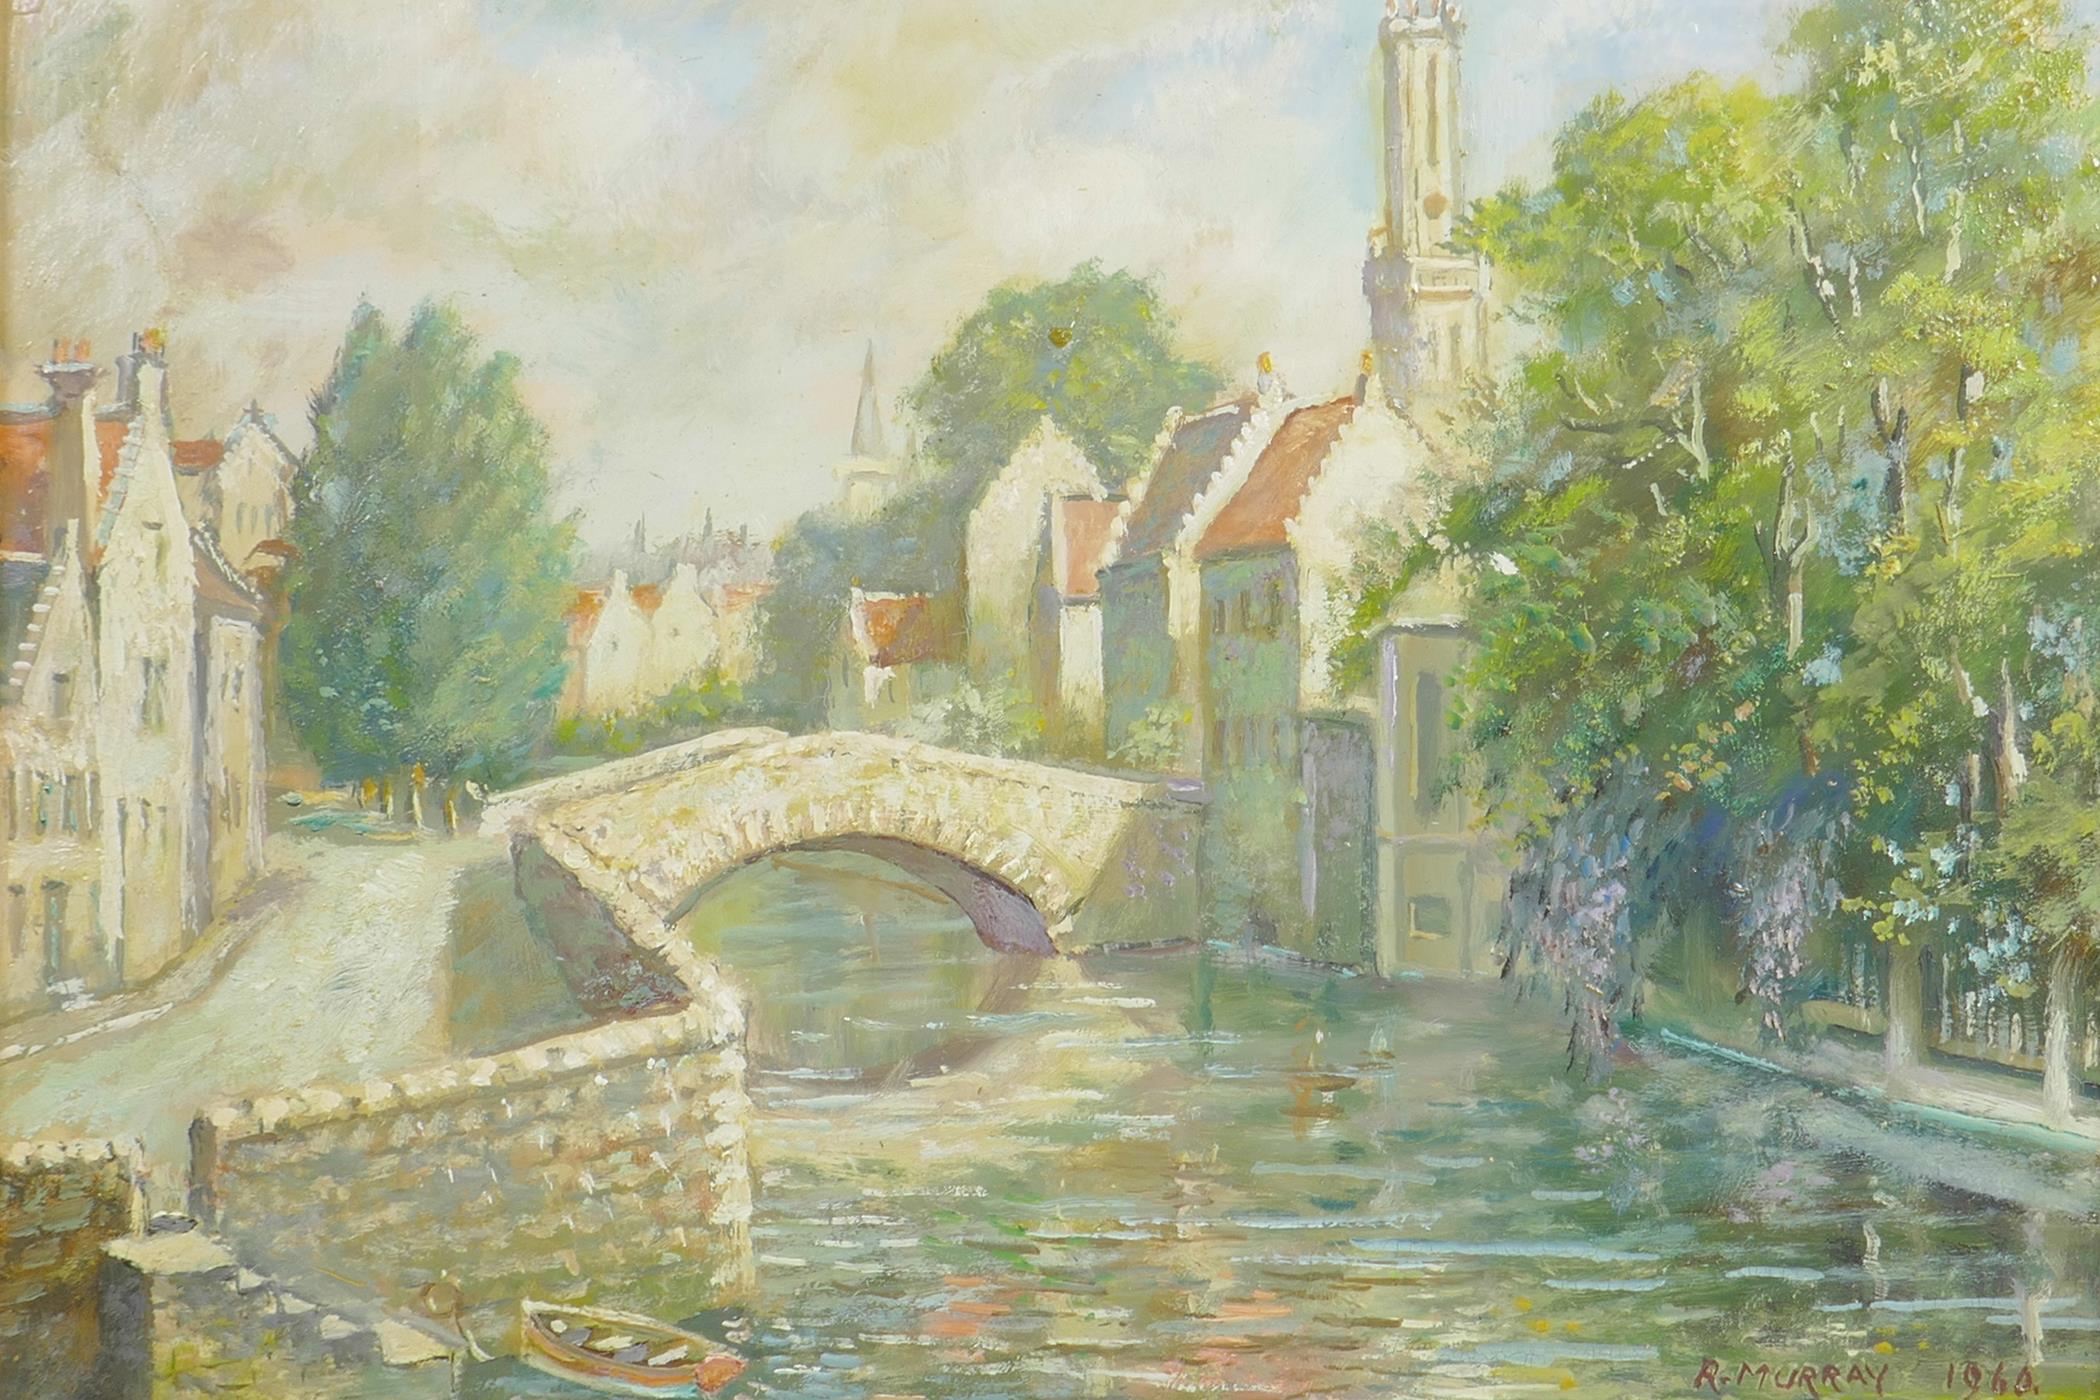 Robert Murray, river and town scene with stone bridge, signed and dated 1960, oil on board, 13" x